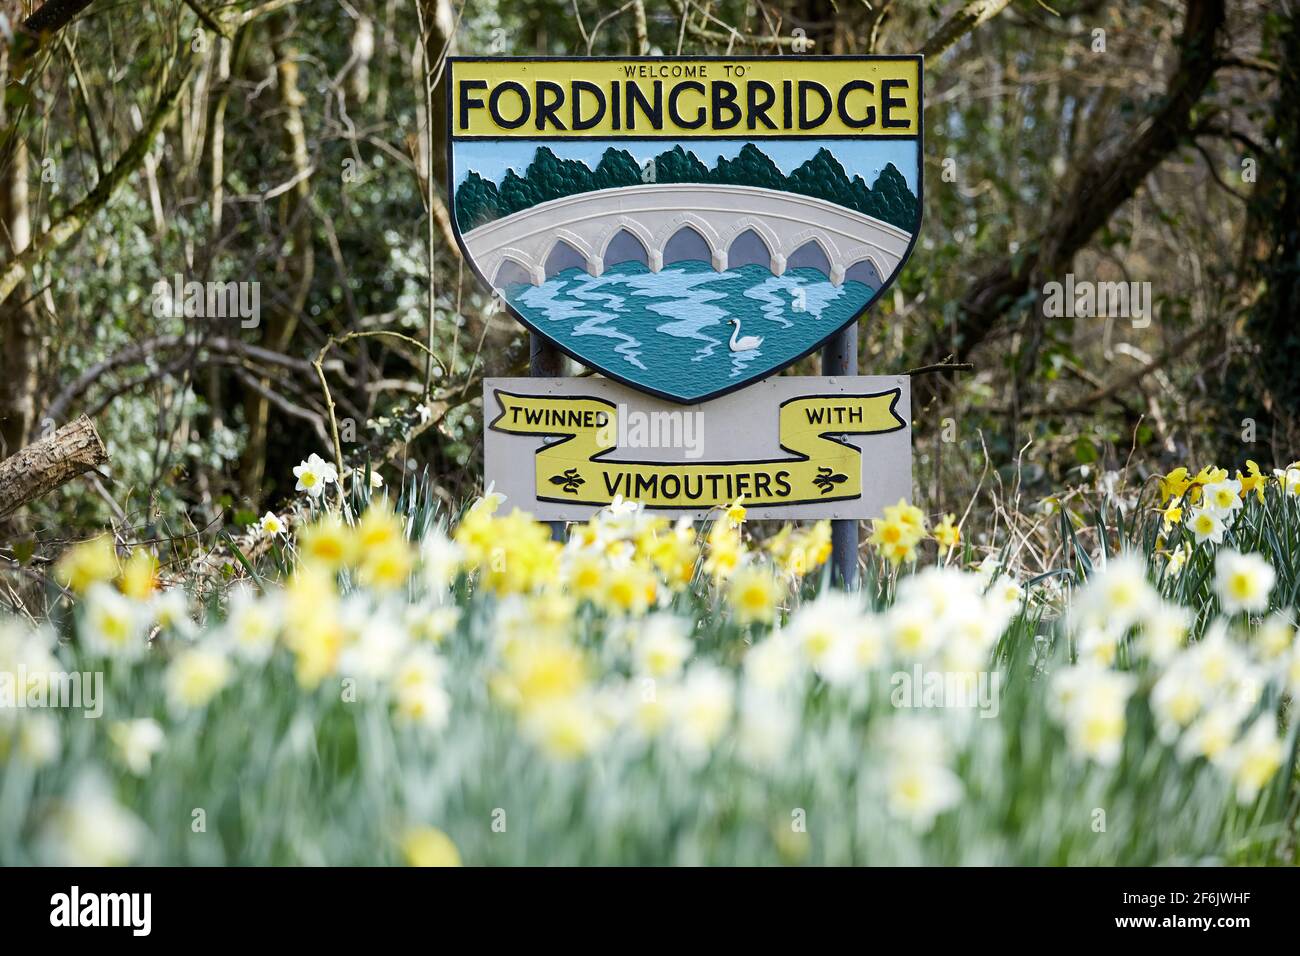 Fordingbridge, UK - 22 Mar 2021: A sign for the Hampshire town of Fordingbridge is surrounded by daffodil flowers as Spring approaches. Stock Photo